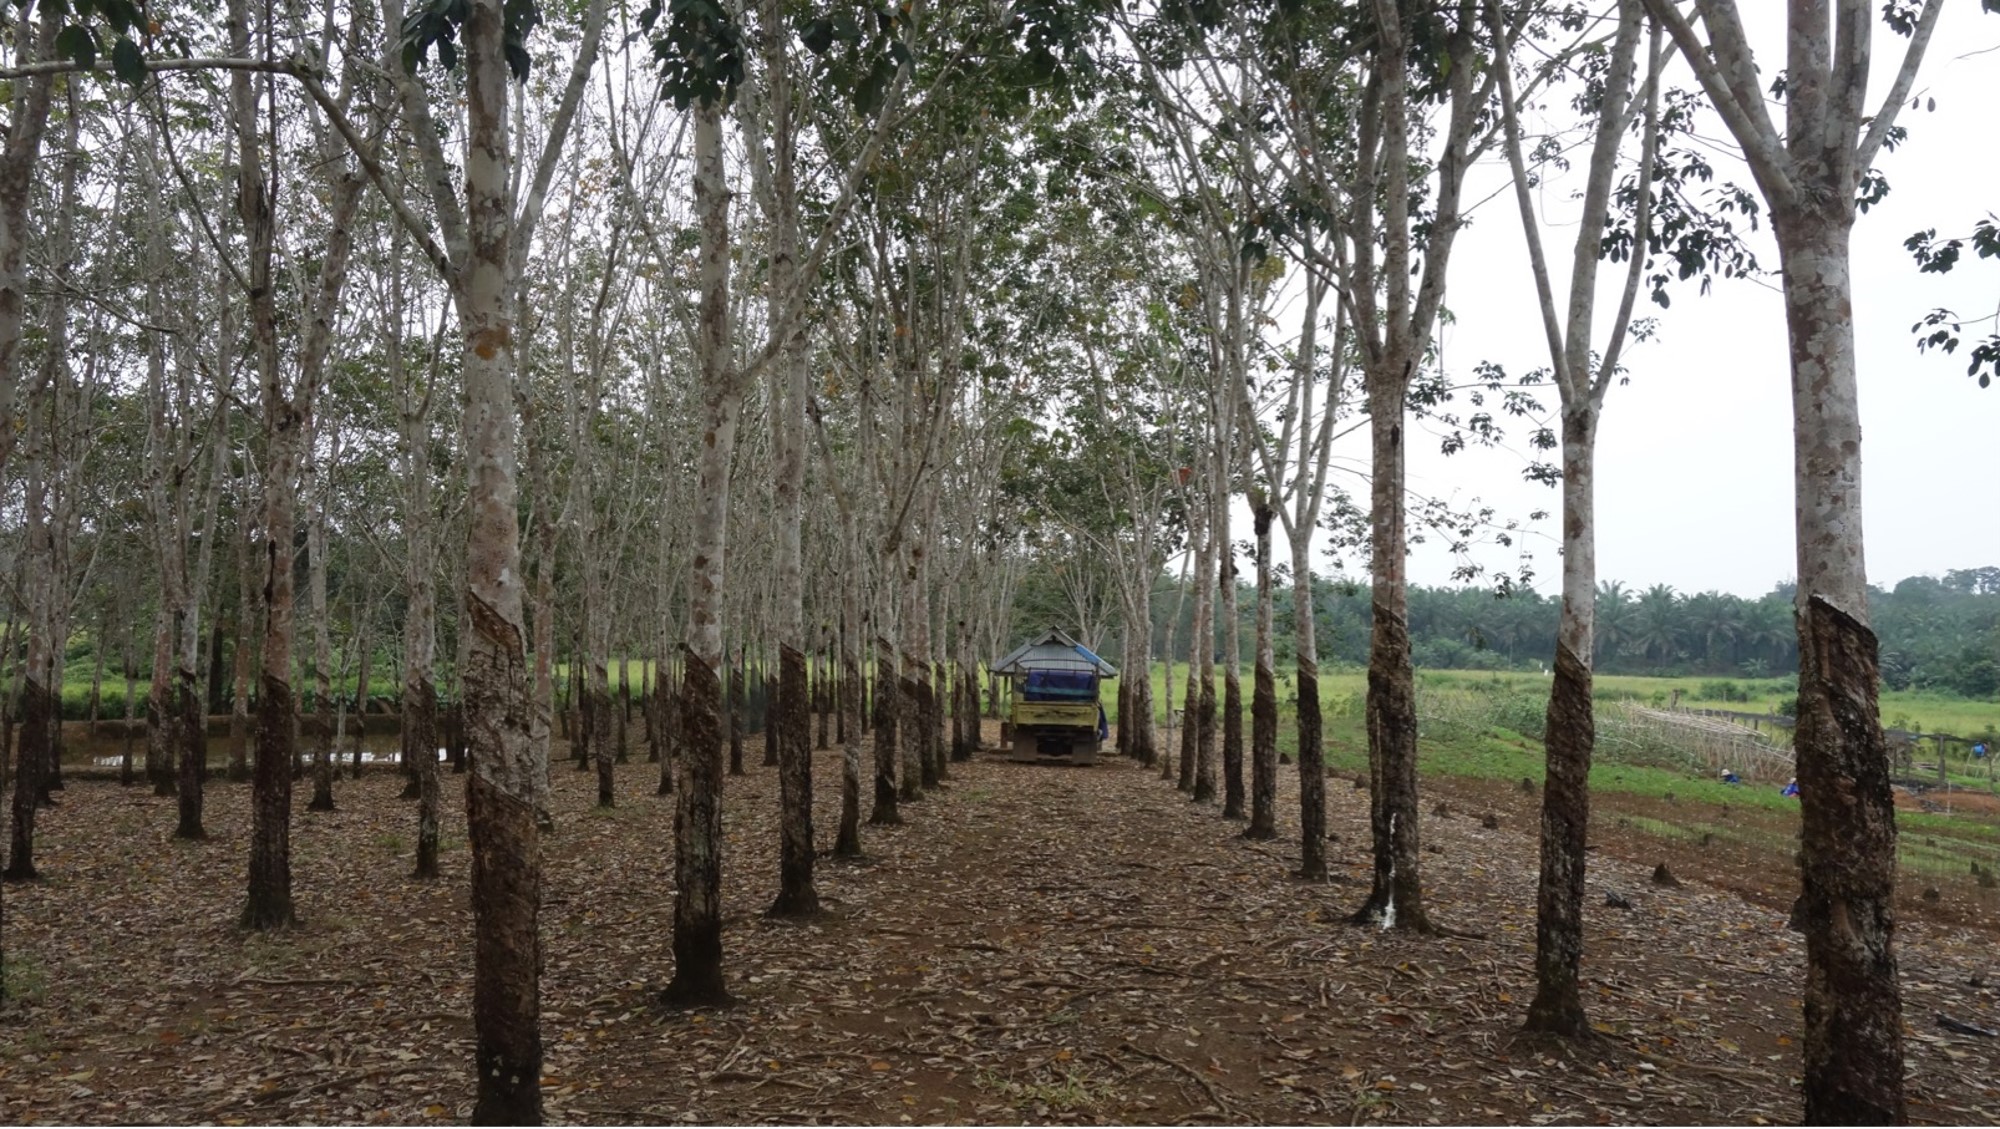 Field Notes from West Kalimantan: The Unmet Needs of Rubber Farmers